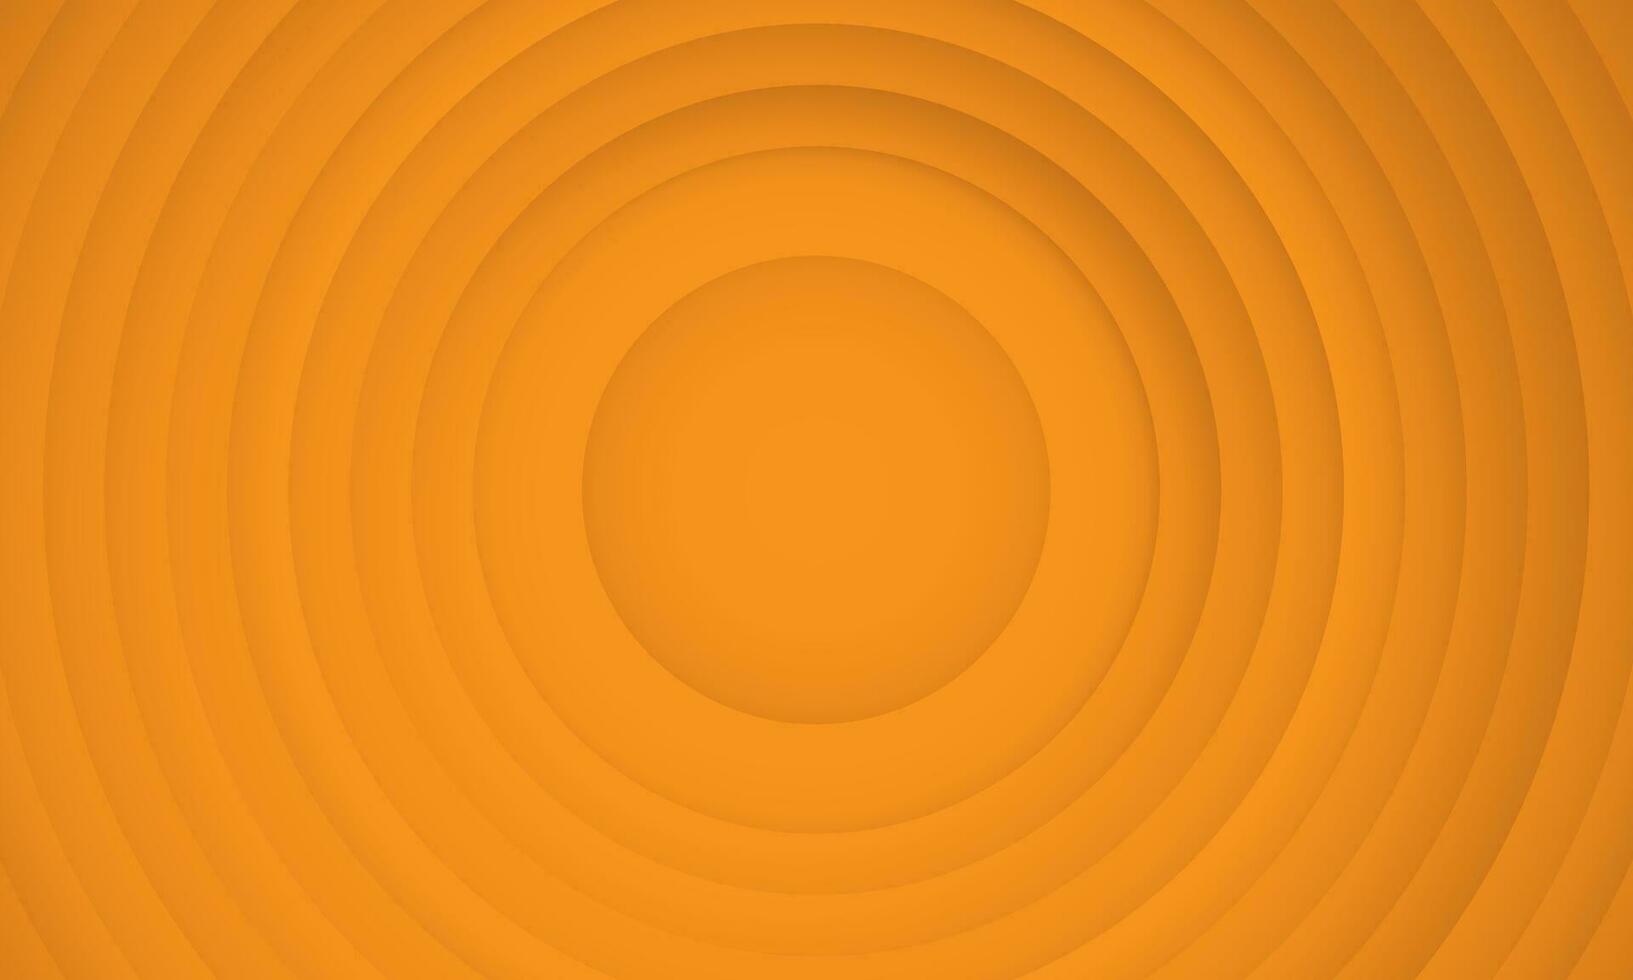 Abstract circle layers texture on orange background with shadow. vector